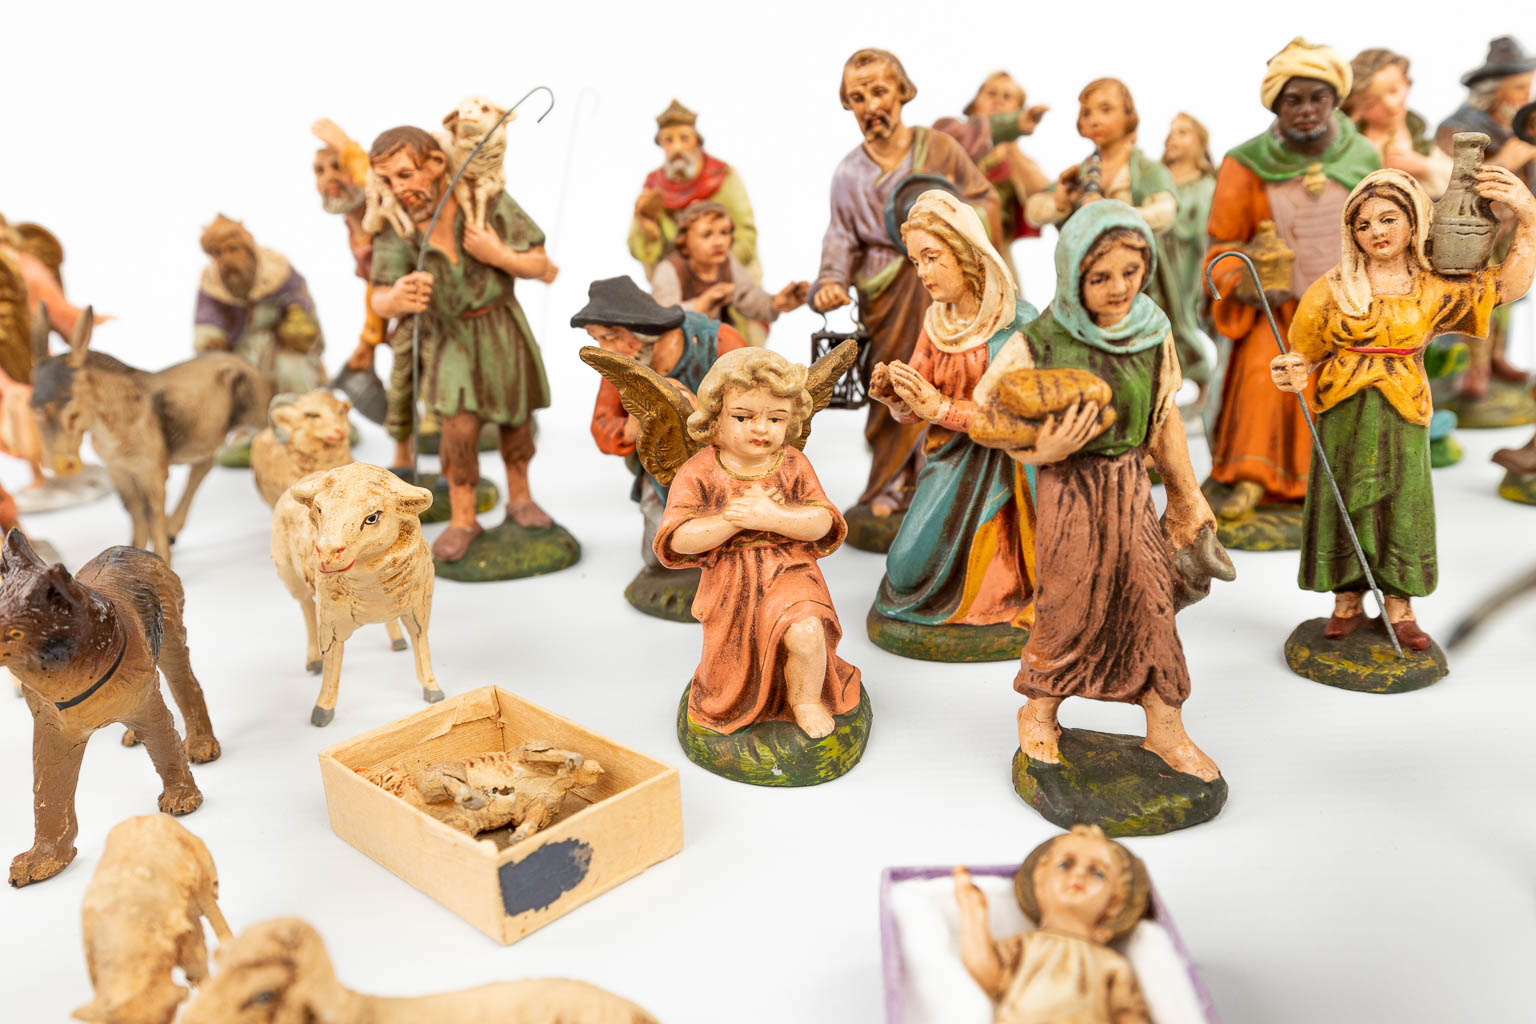 A large and extended Nativity scene with figurines and animals made of papier maché. 